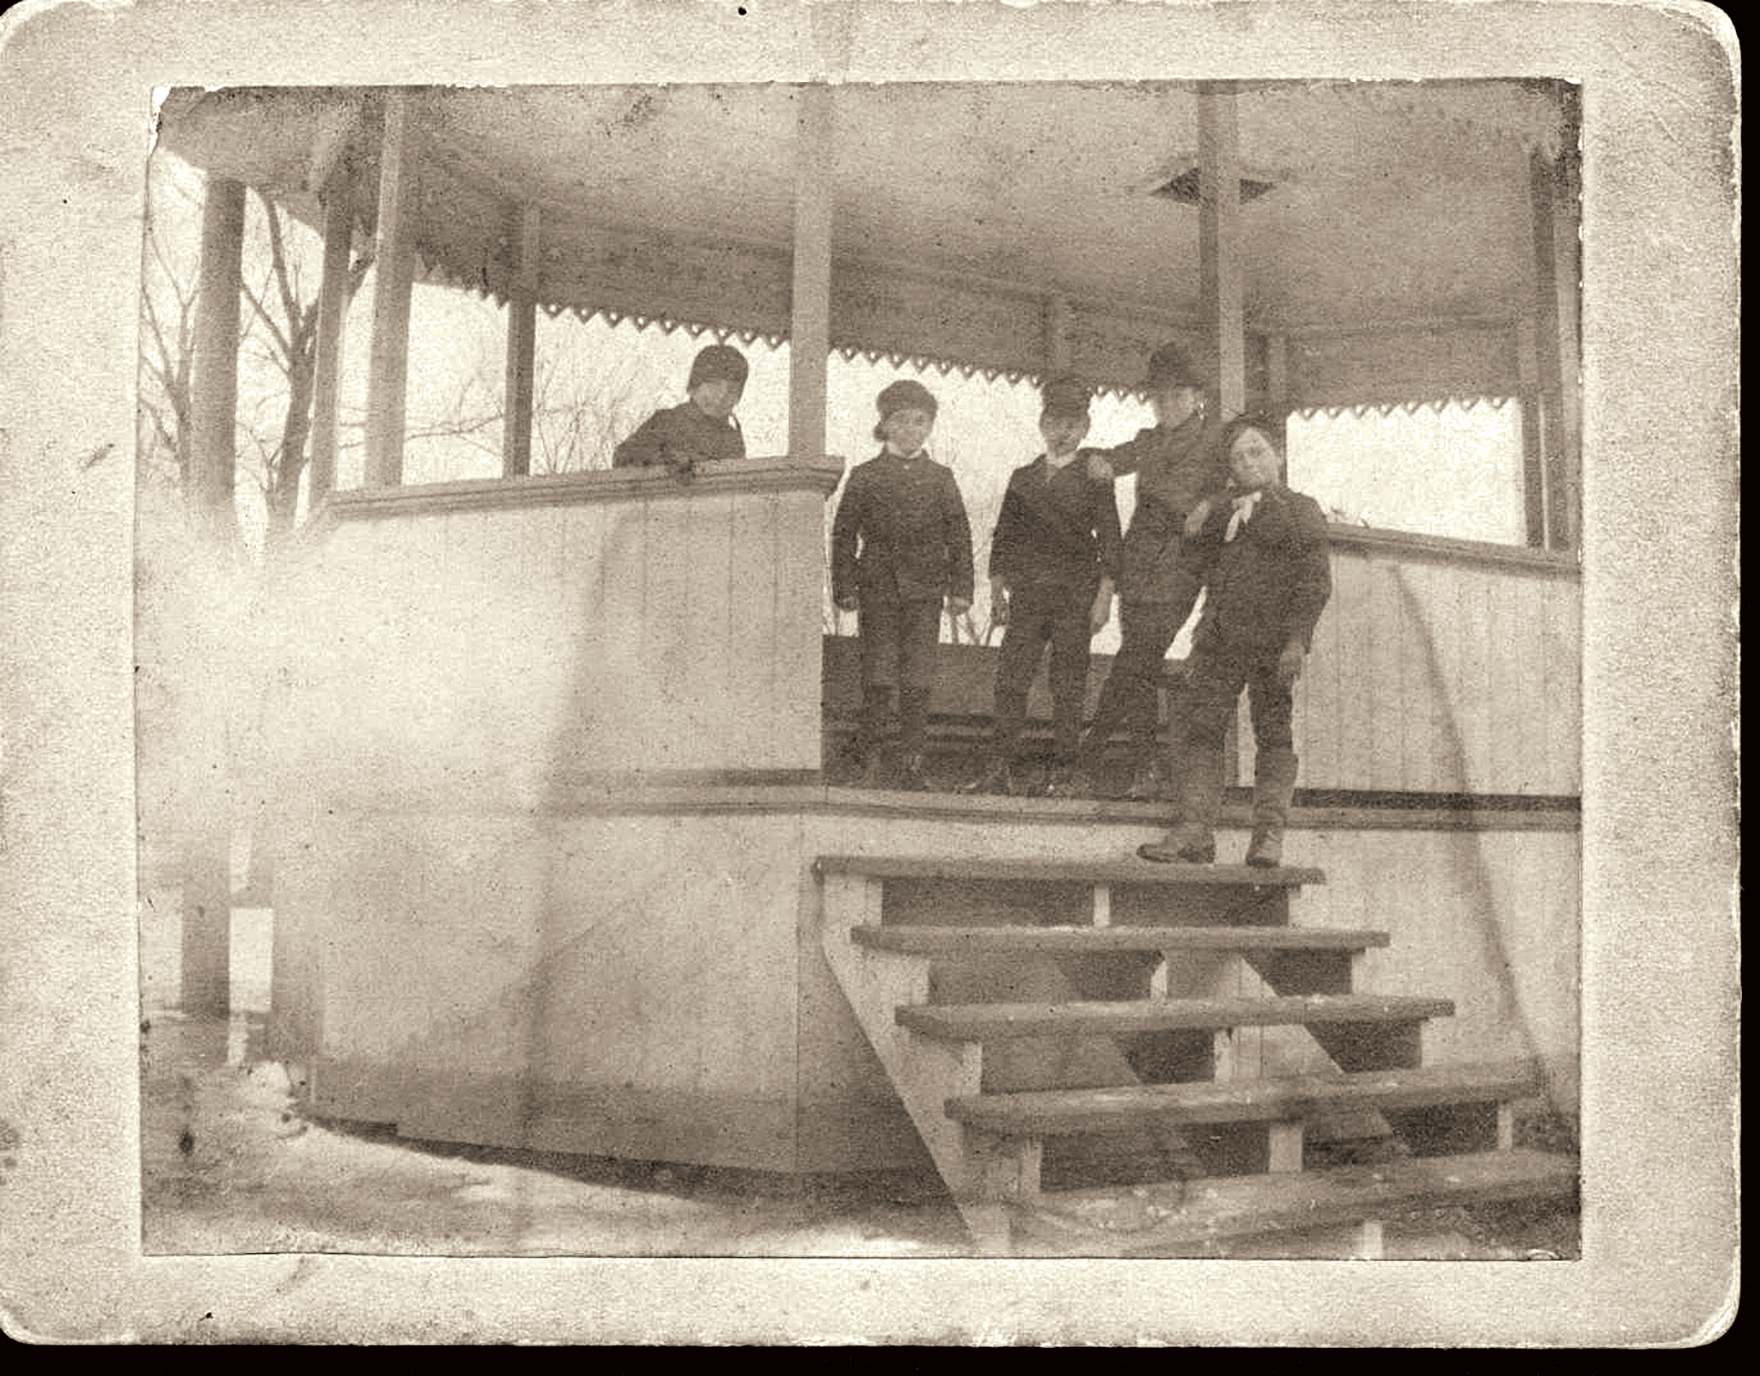 Children at Central Park bandstand, late nineteenth century